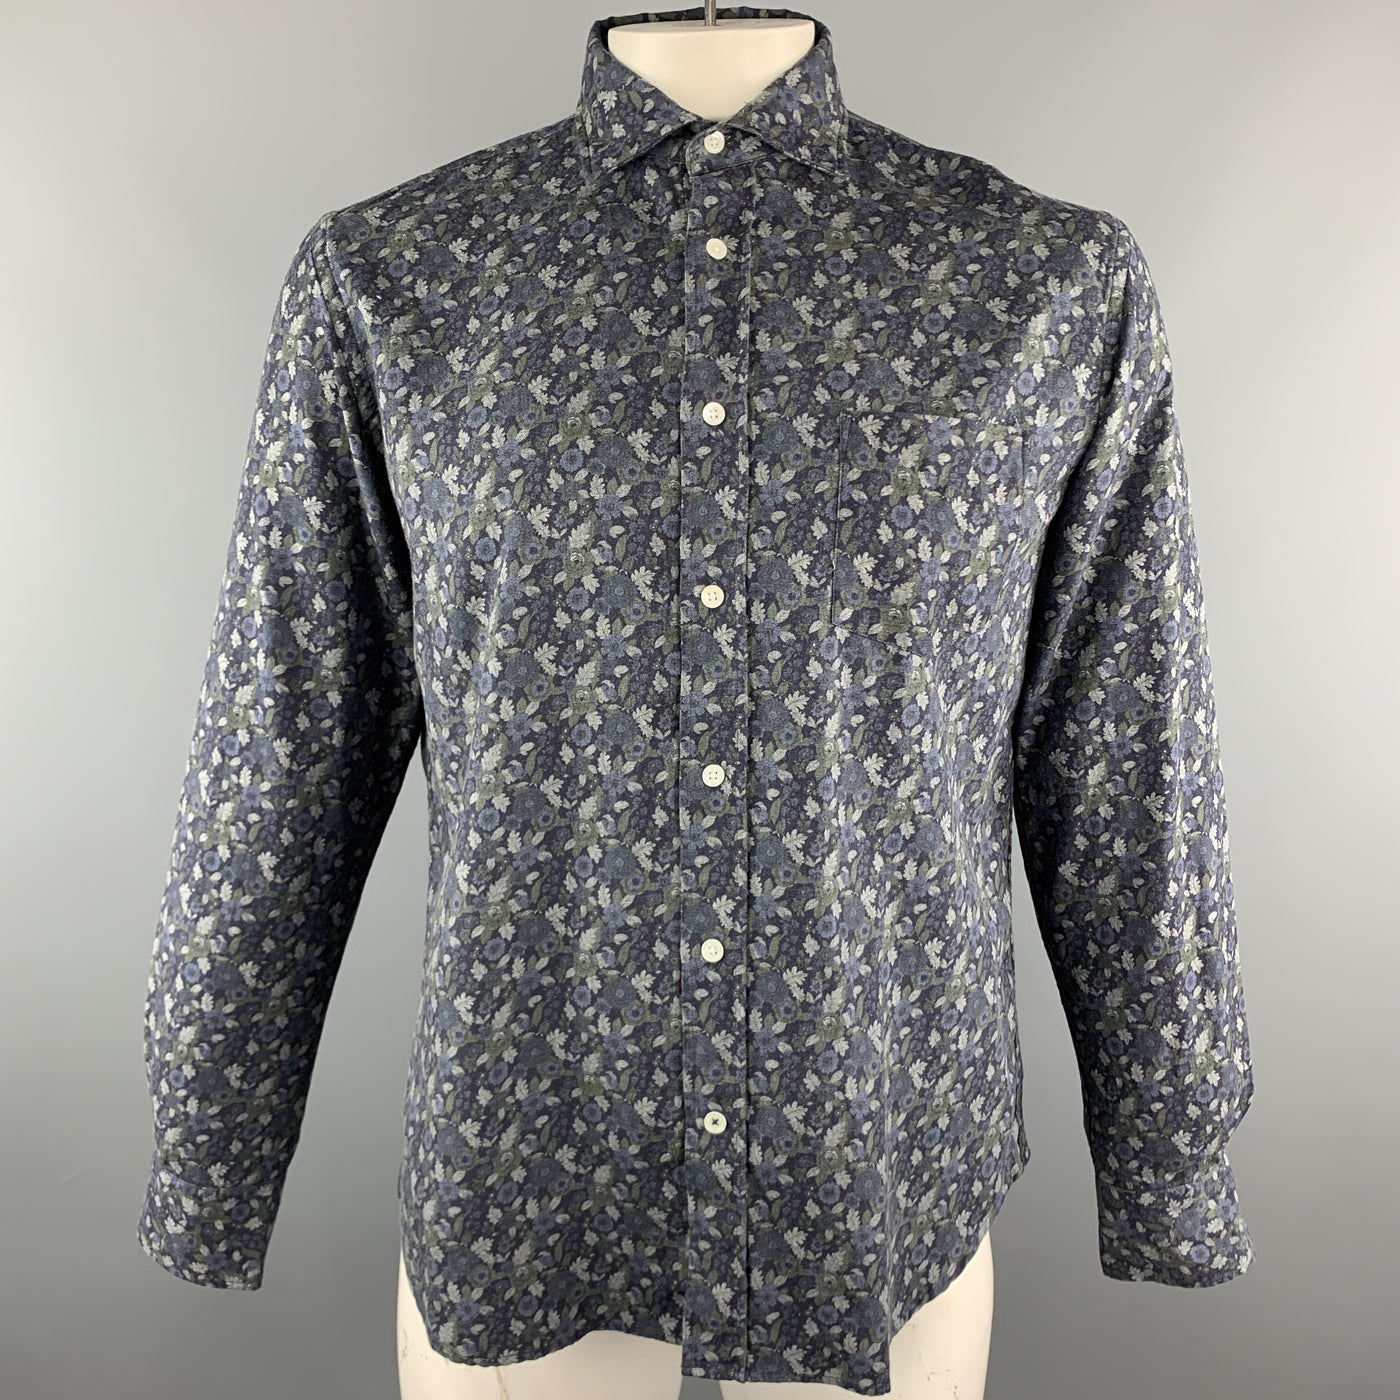 HARTFORD Size L Navy & Grey Floral Cotton Button Up Long Sleeve Shirt